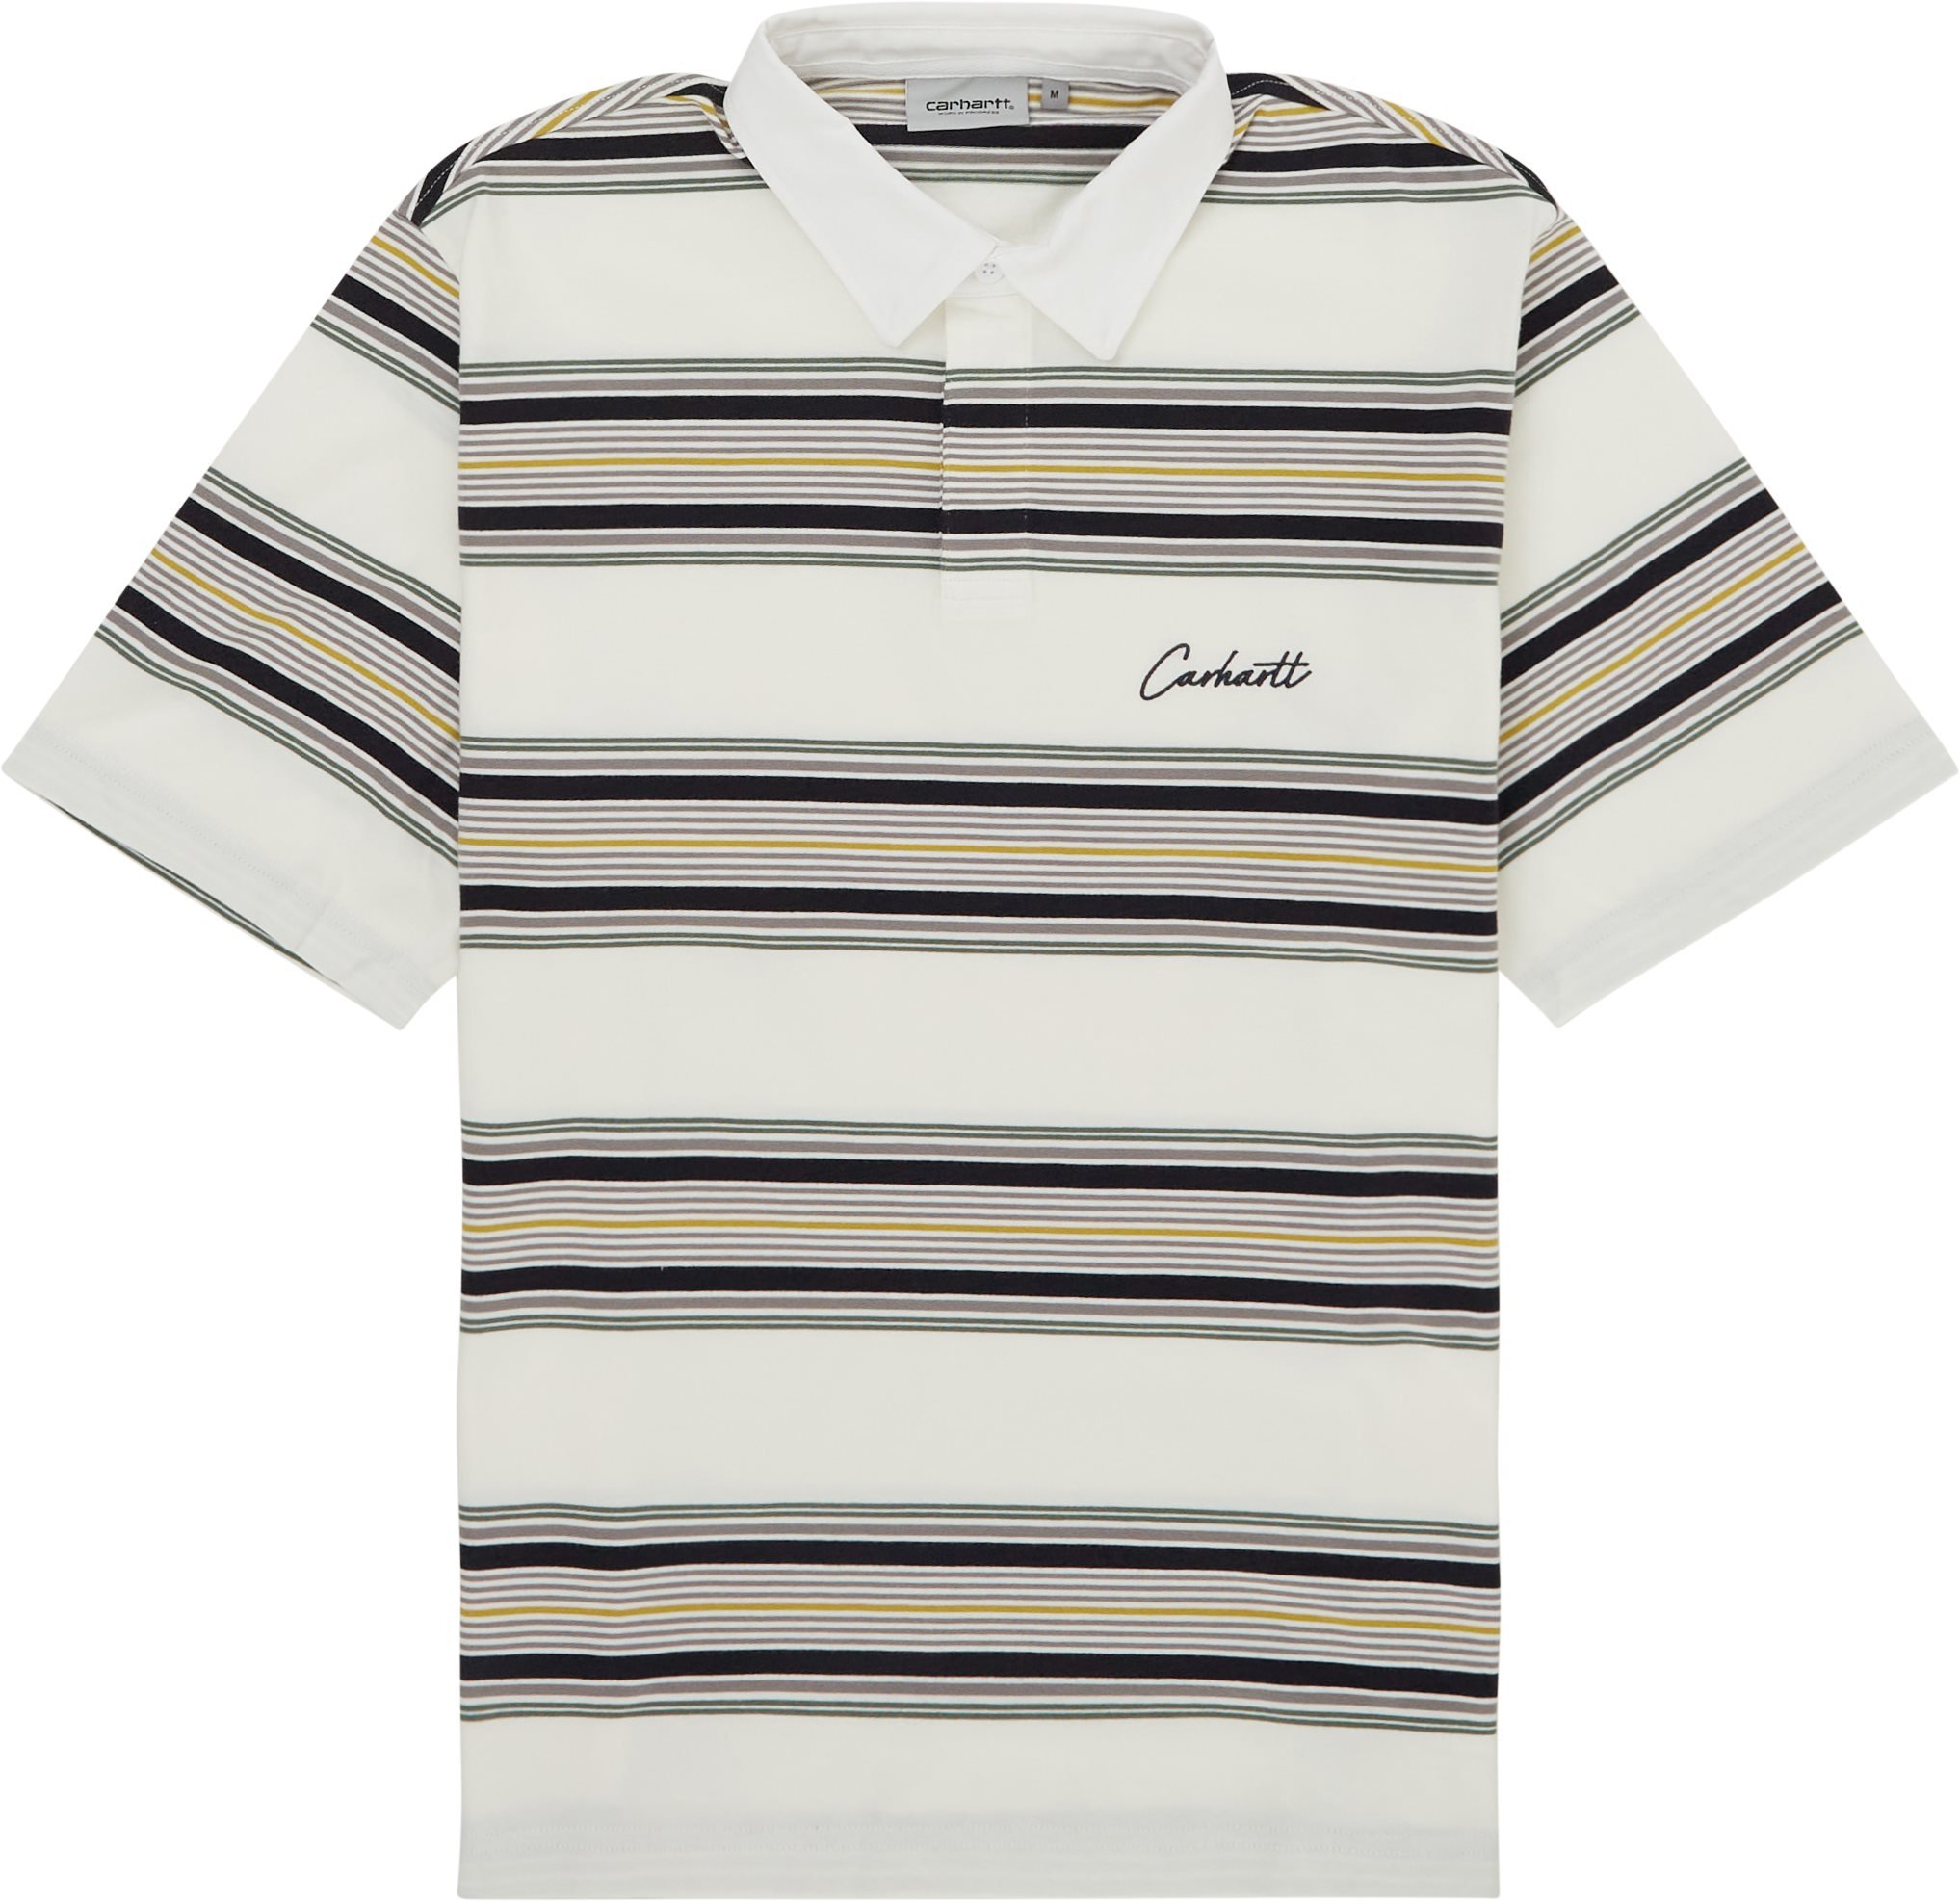 Carhartt WIP T-shirts S/S GAINES RUGBY SHIRT I033614 Hvid